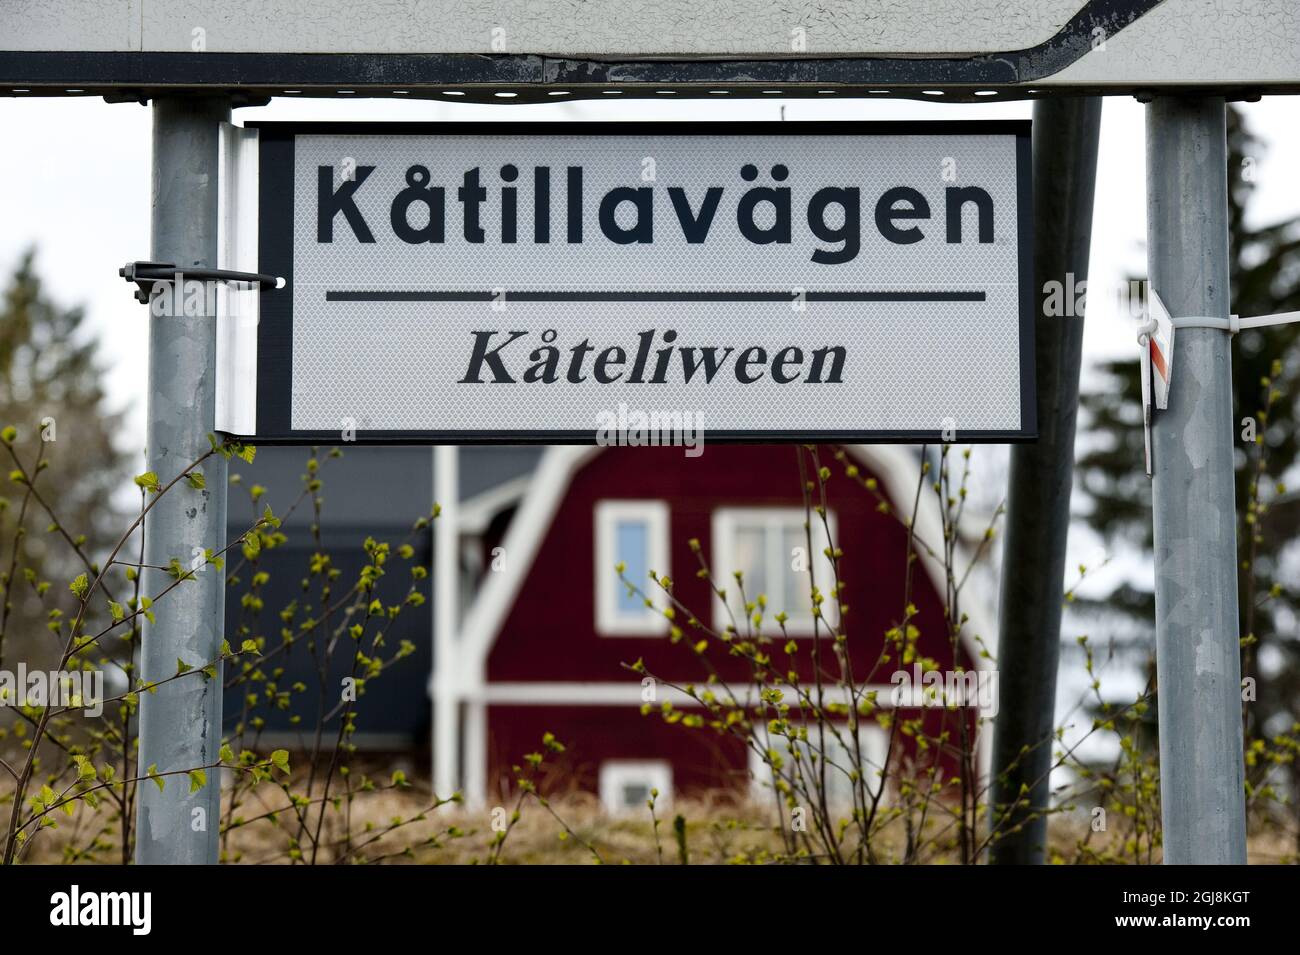 ALVDALEN 20110504 The street sign with name Katillavagen street in both Swedish and the local language, in the Swedish municipality of Alvdalen in Central Sweden May 5, 2011. Prince Carl Philips girlfriend Sofia Hellqvist was brought up in Alvdalen and her family still lives here. Foto: Ulf Palm/ SCANPIX / 9110  Stock Photo